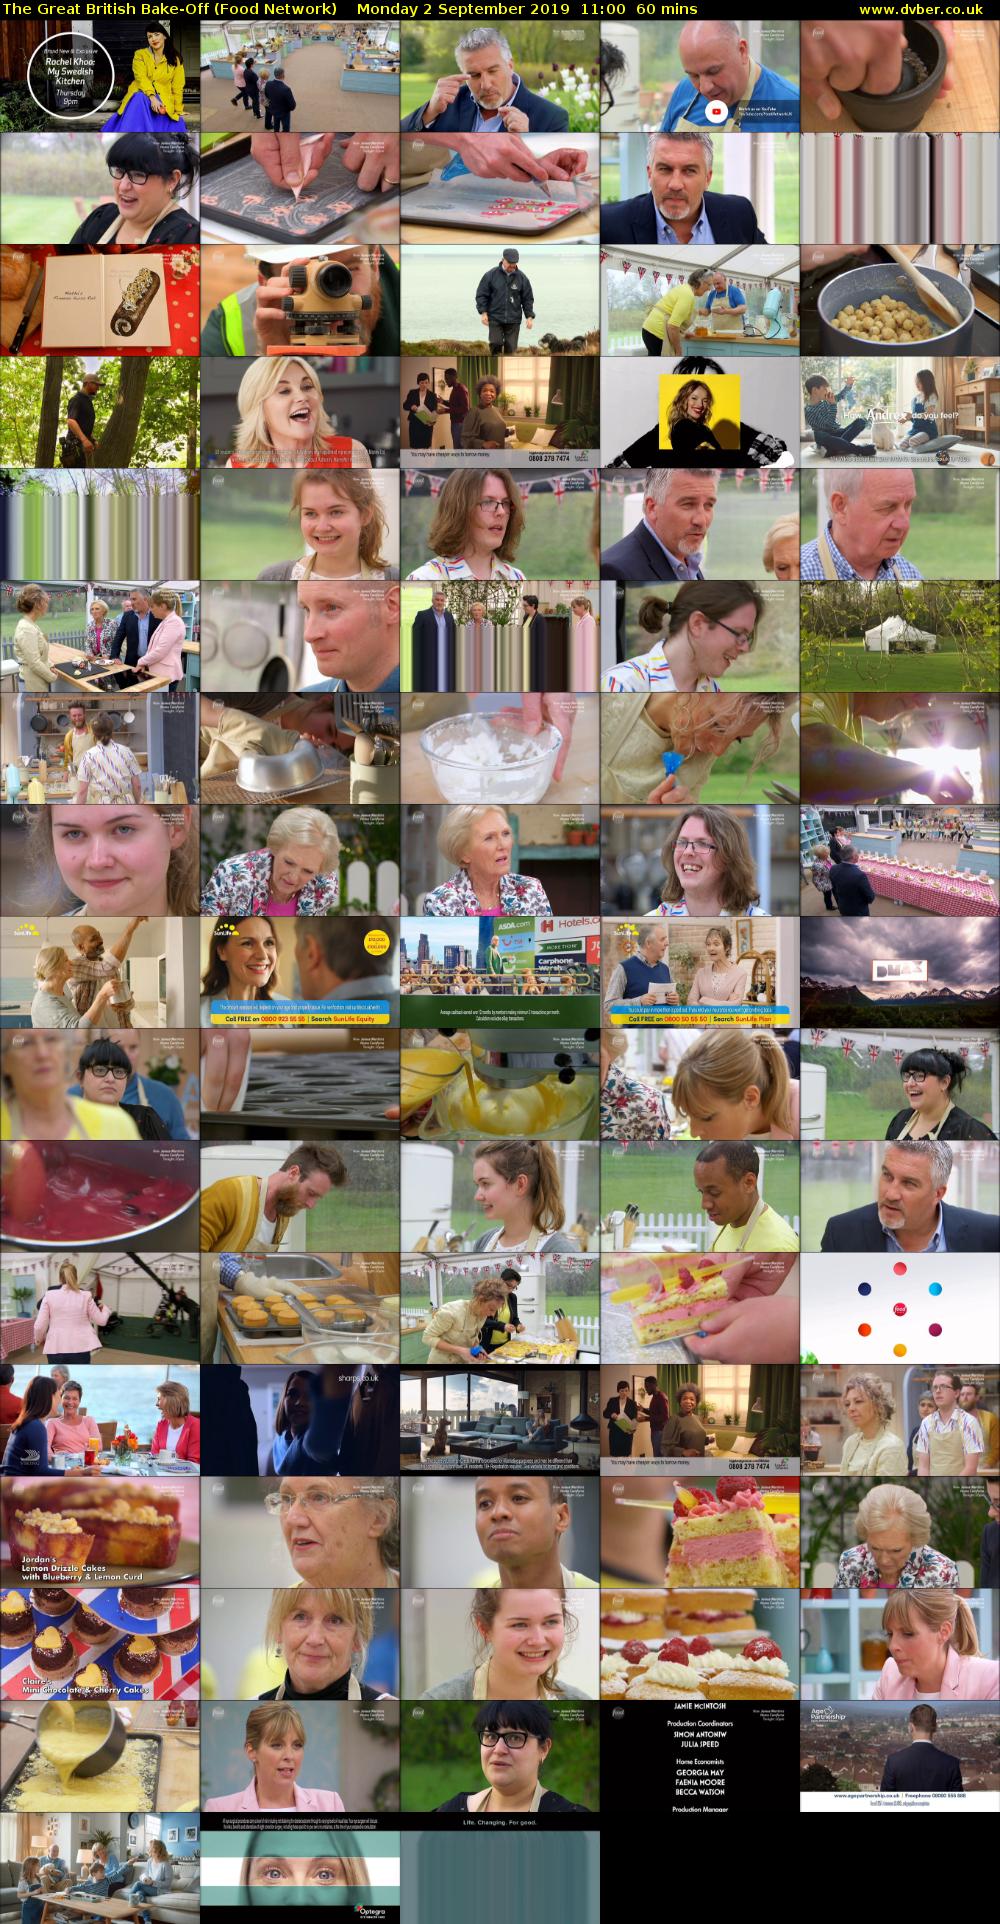 The Great British Bake-Off (Food Network) Monday 2 September 2019 11:00 - 12:00